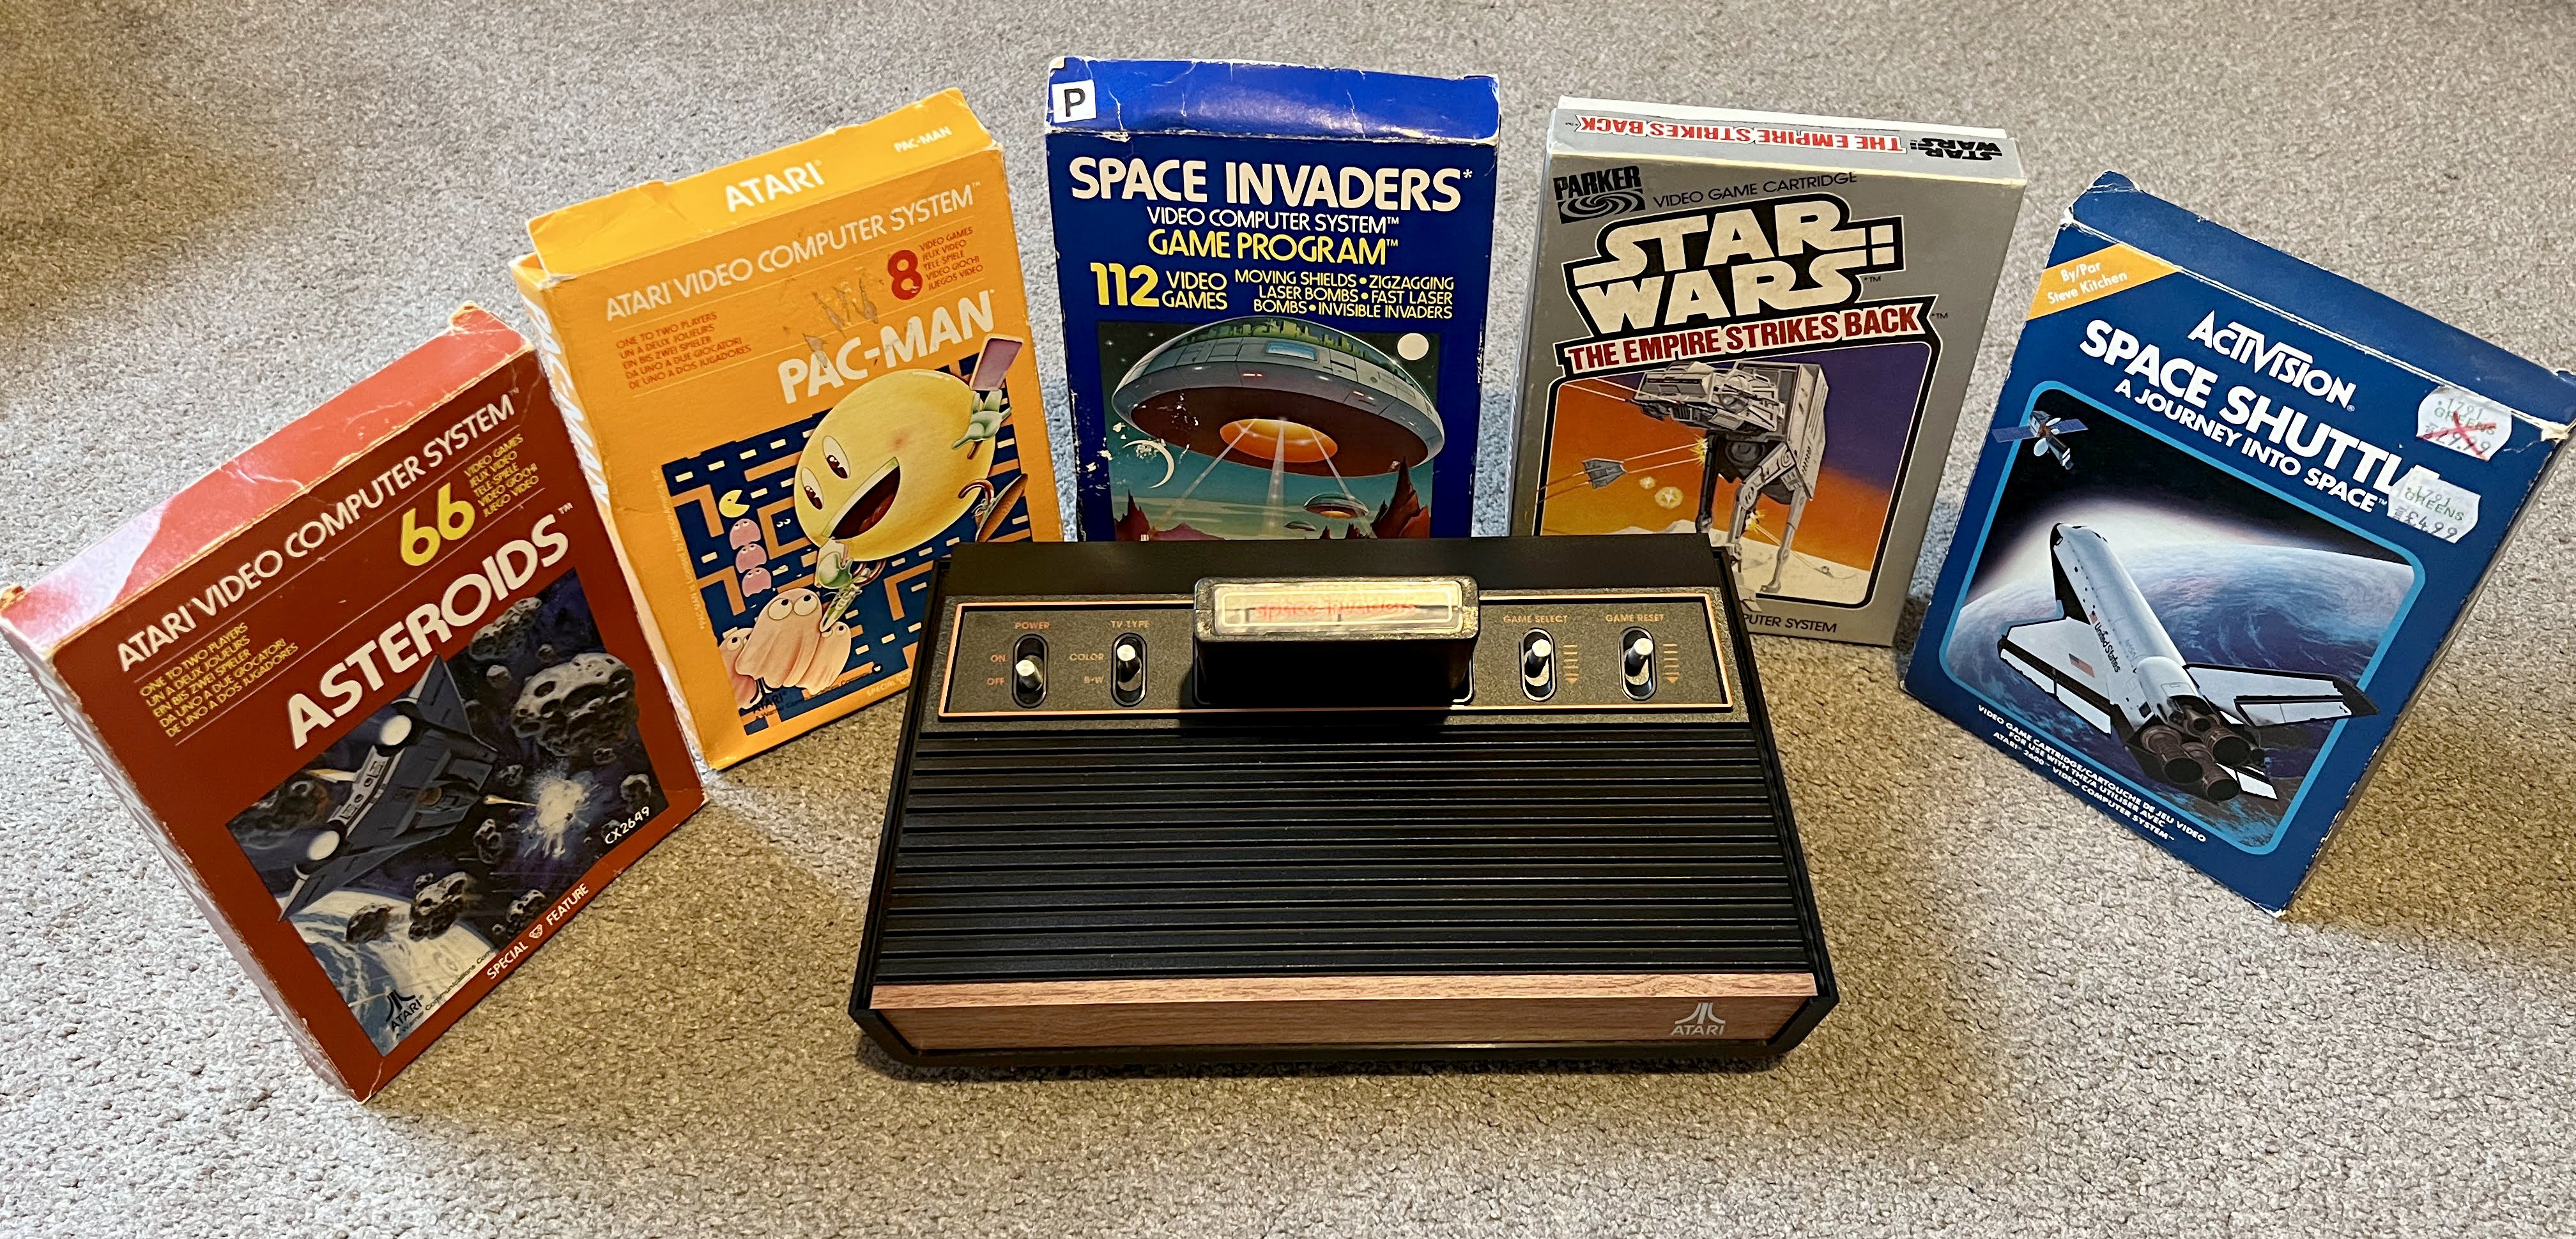 A Re-Created & Modernized Atari 2600 Is Coming in November 2023